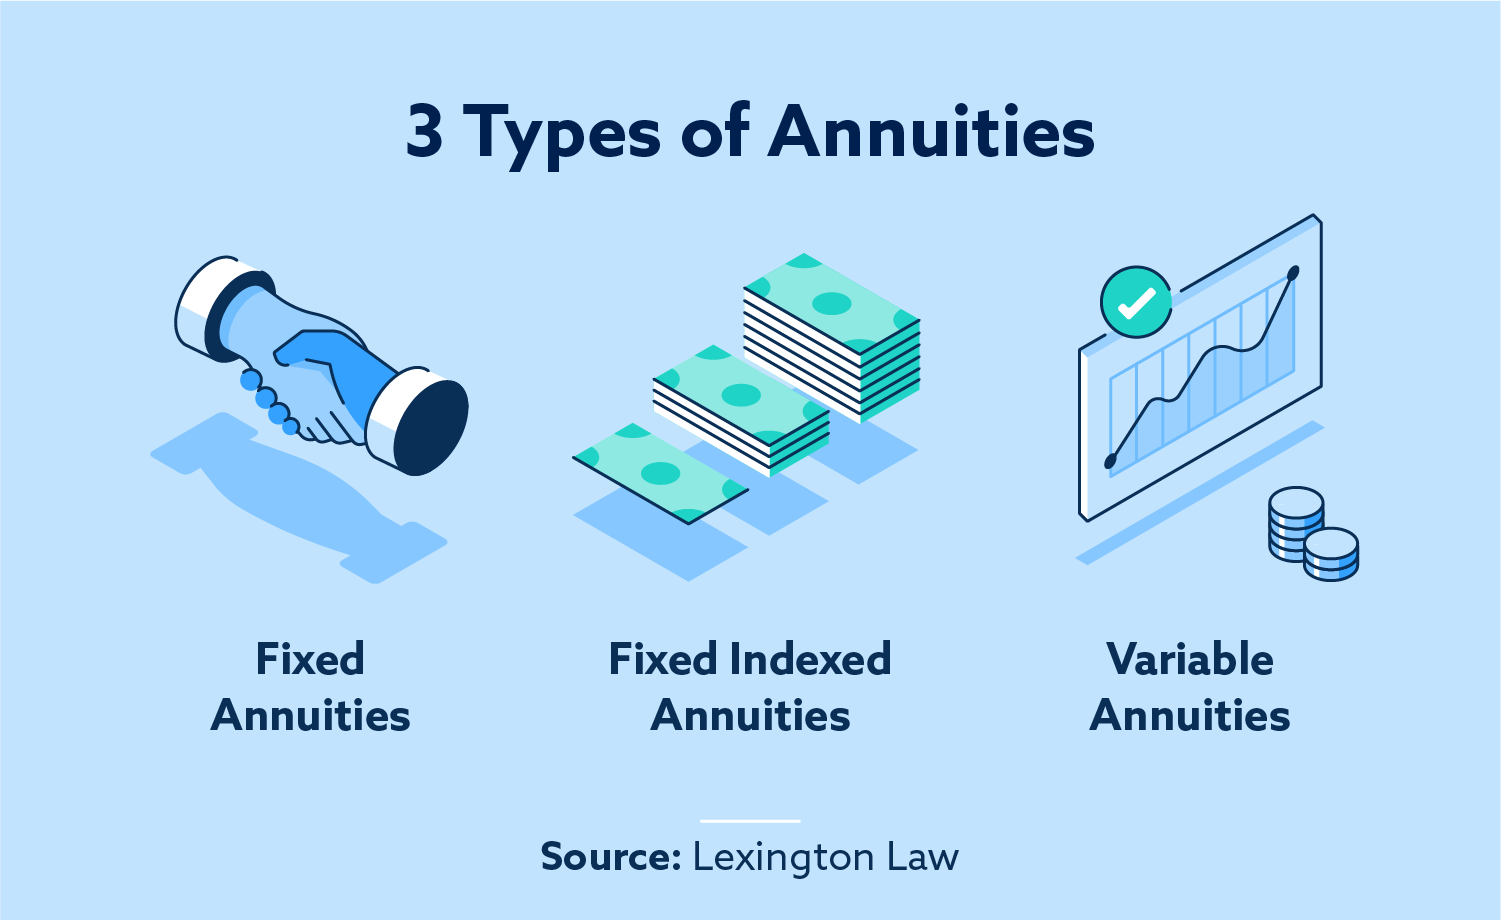 3 types of annuities